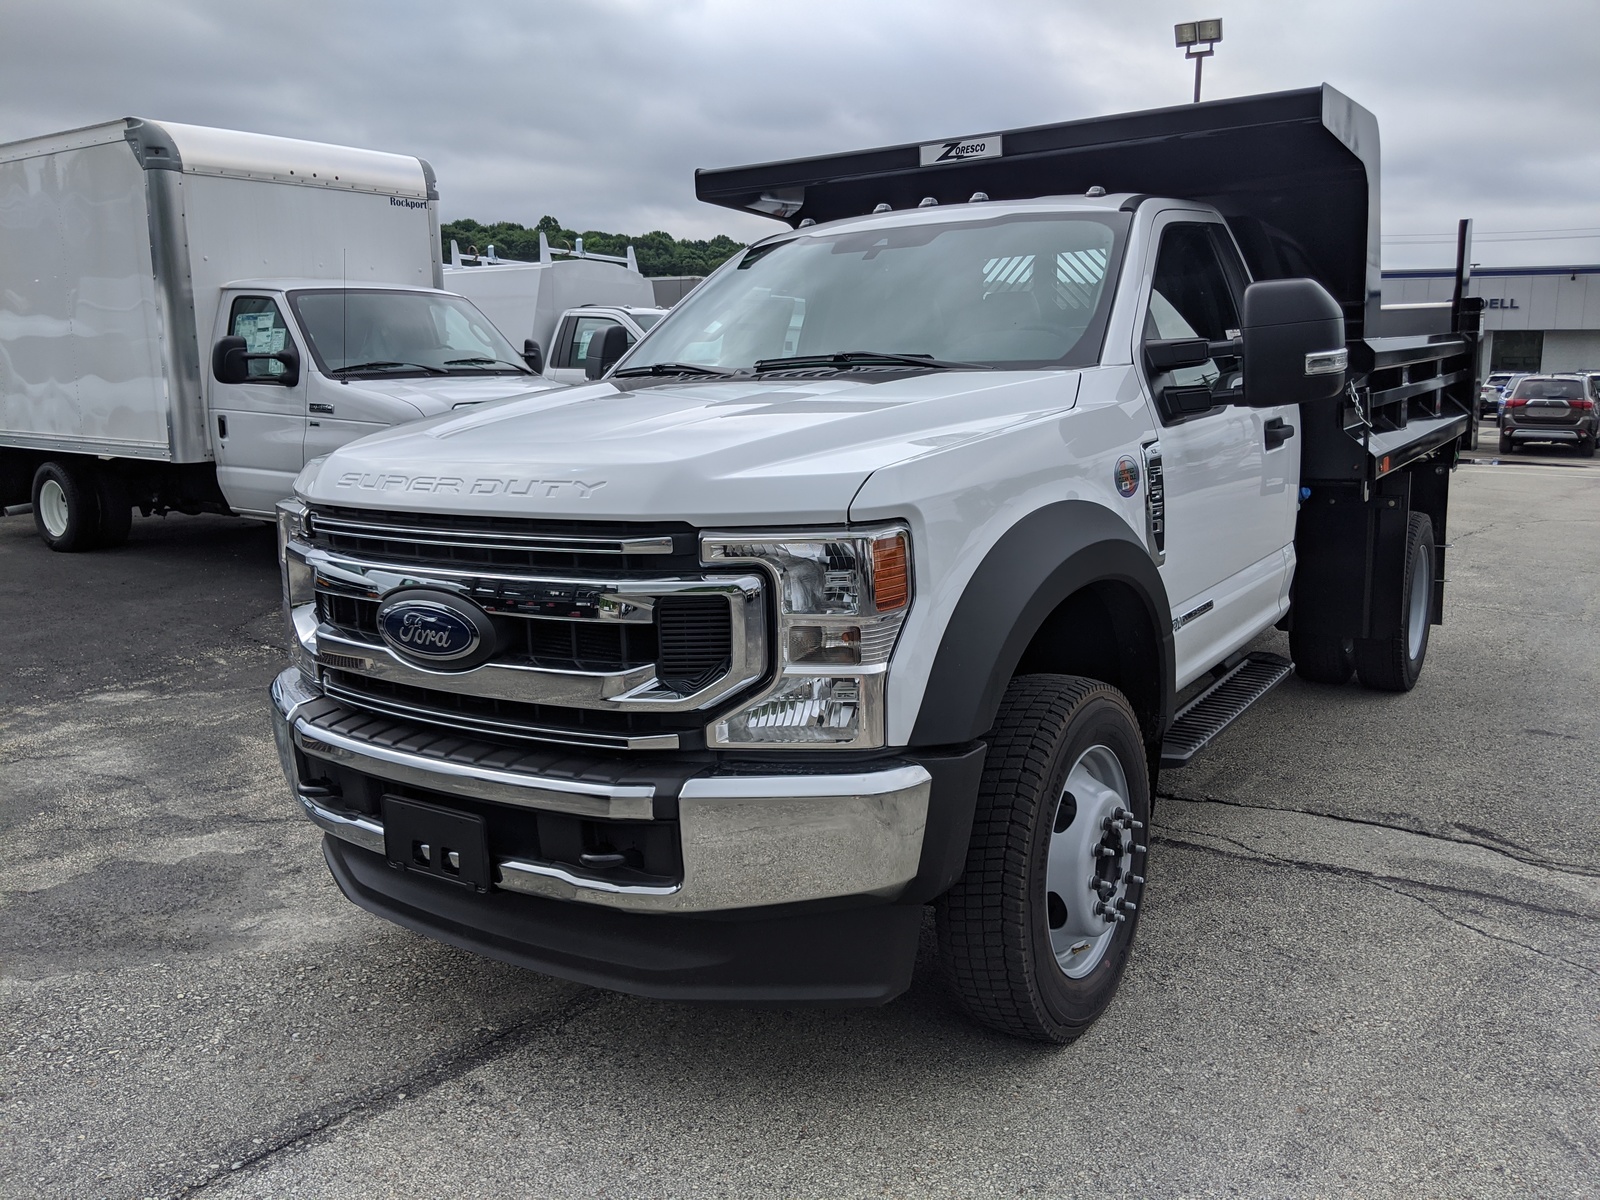 New 2020 Ford Super Duty F550 DRW Chassis Cab XL in Oxford White